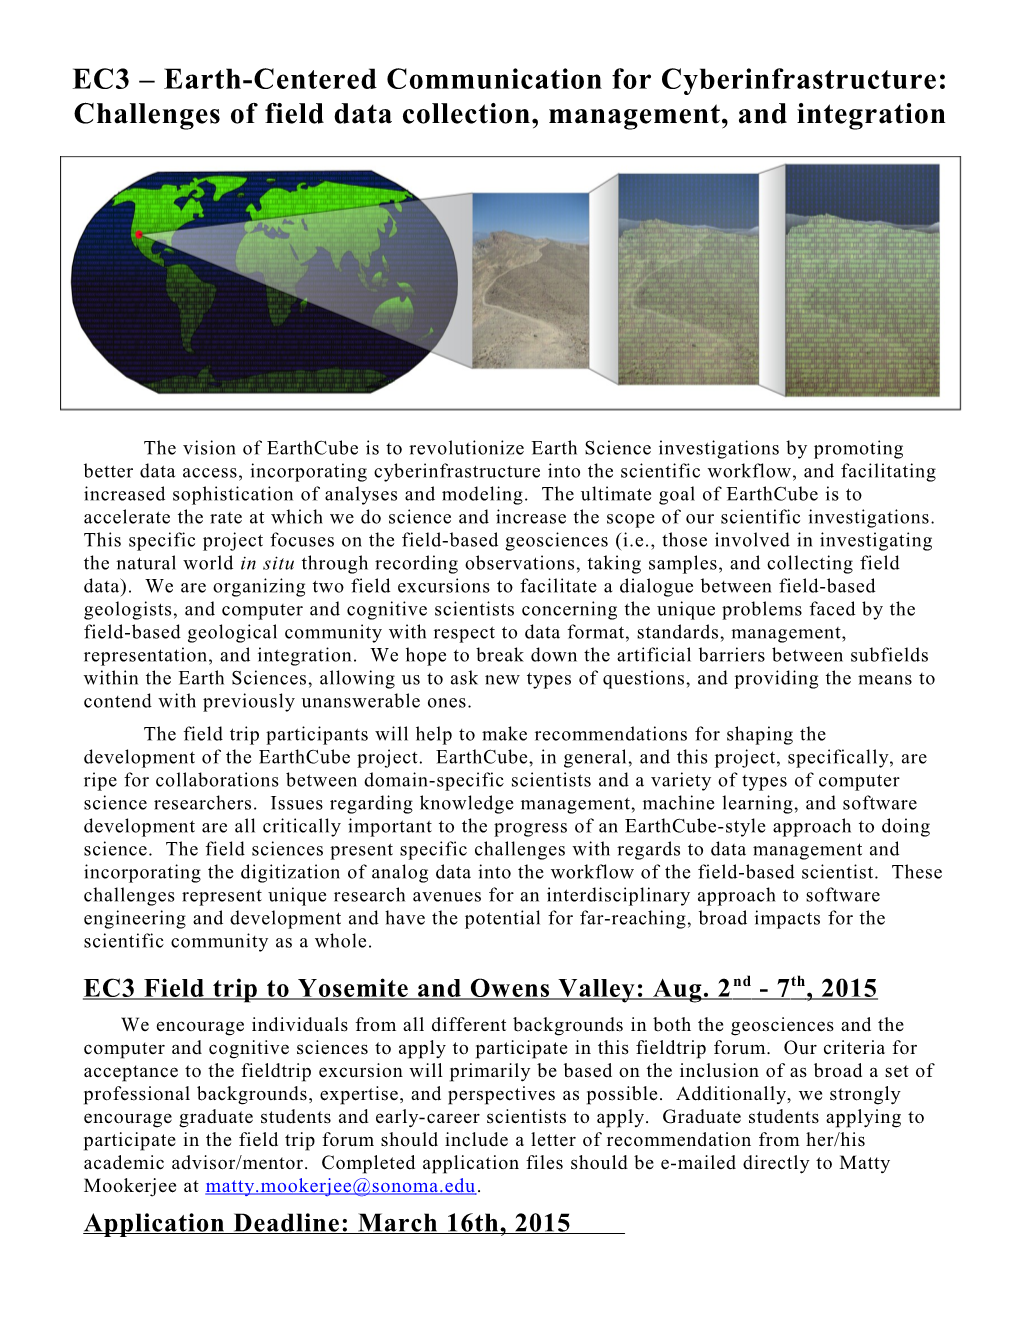 EC3 Earth-Centered Communication for Cyberinfrastructure: Challenges of Field Data Collection